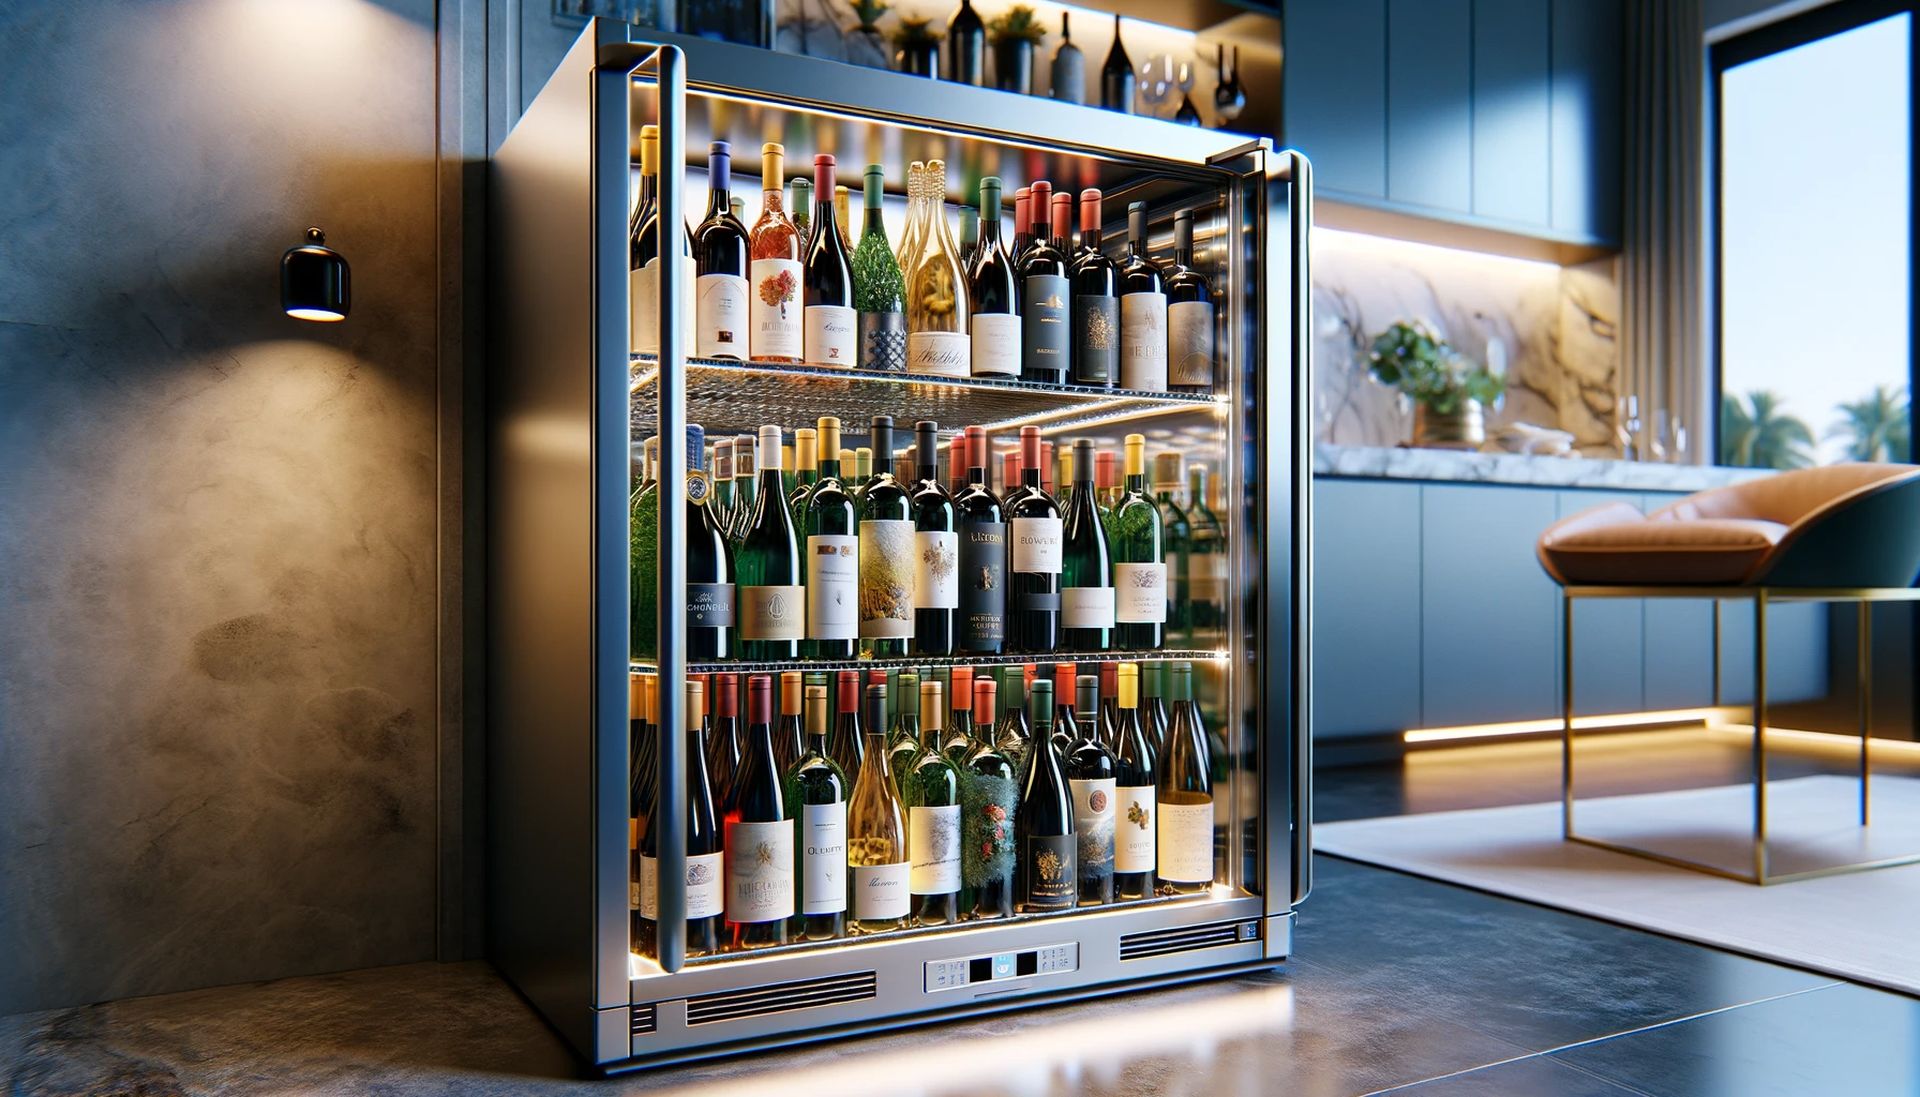 Expert guide on how to preserve wine cooler at home, featuring various wine bottles and maintenance tools